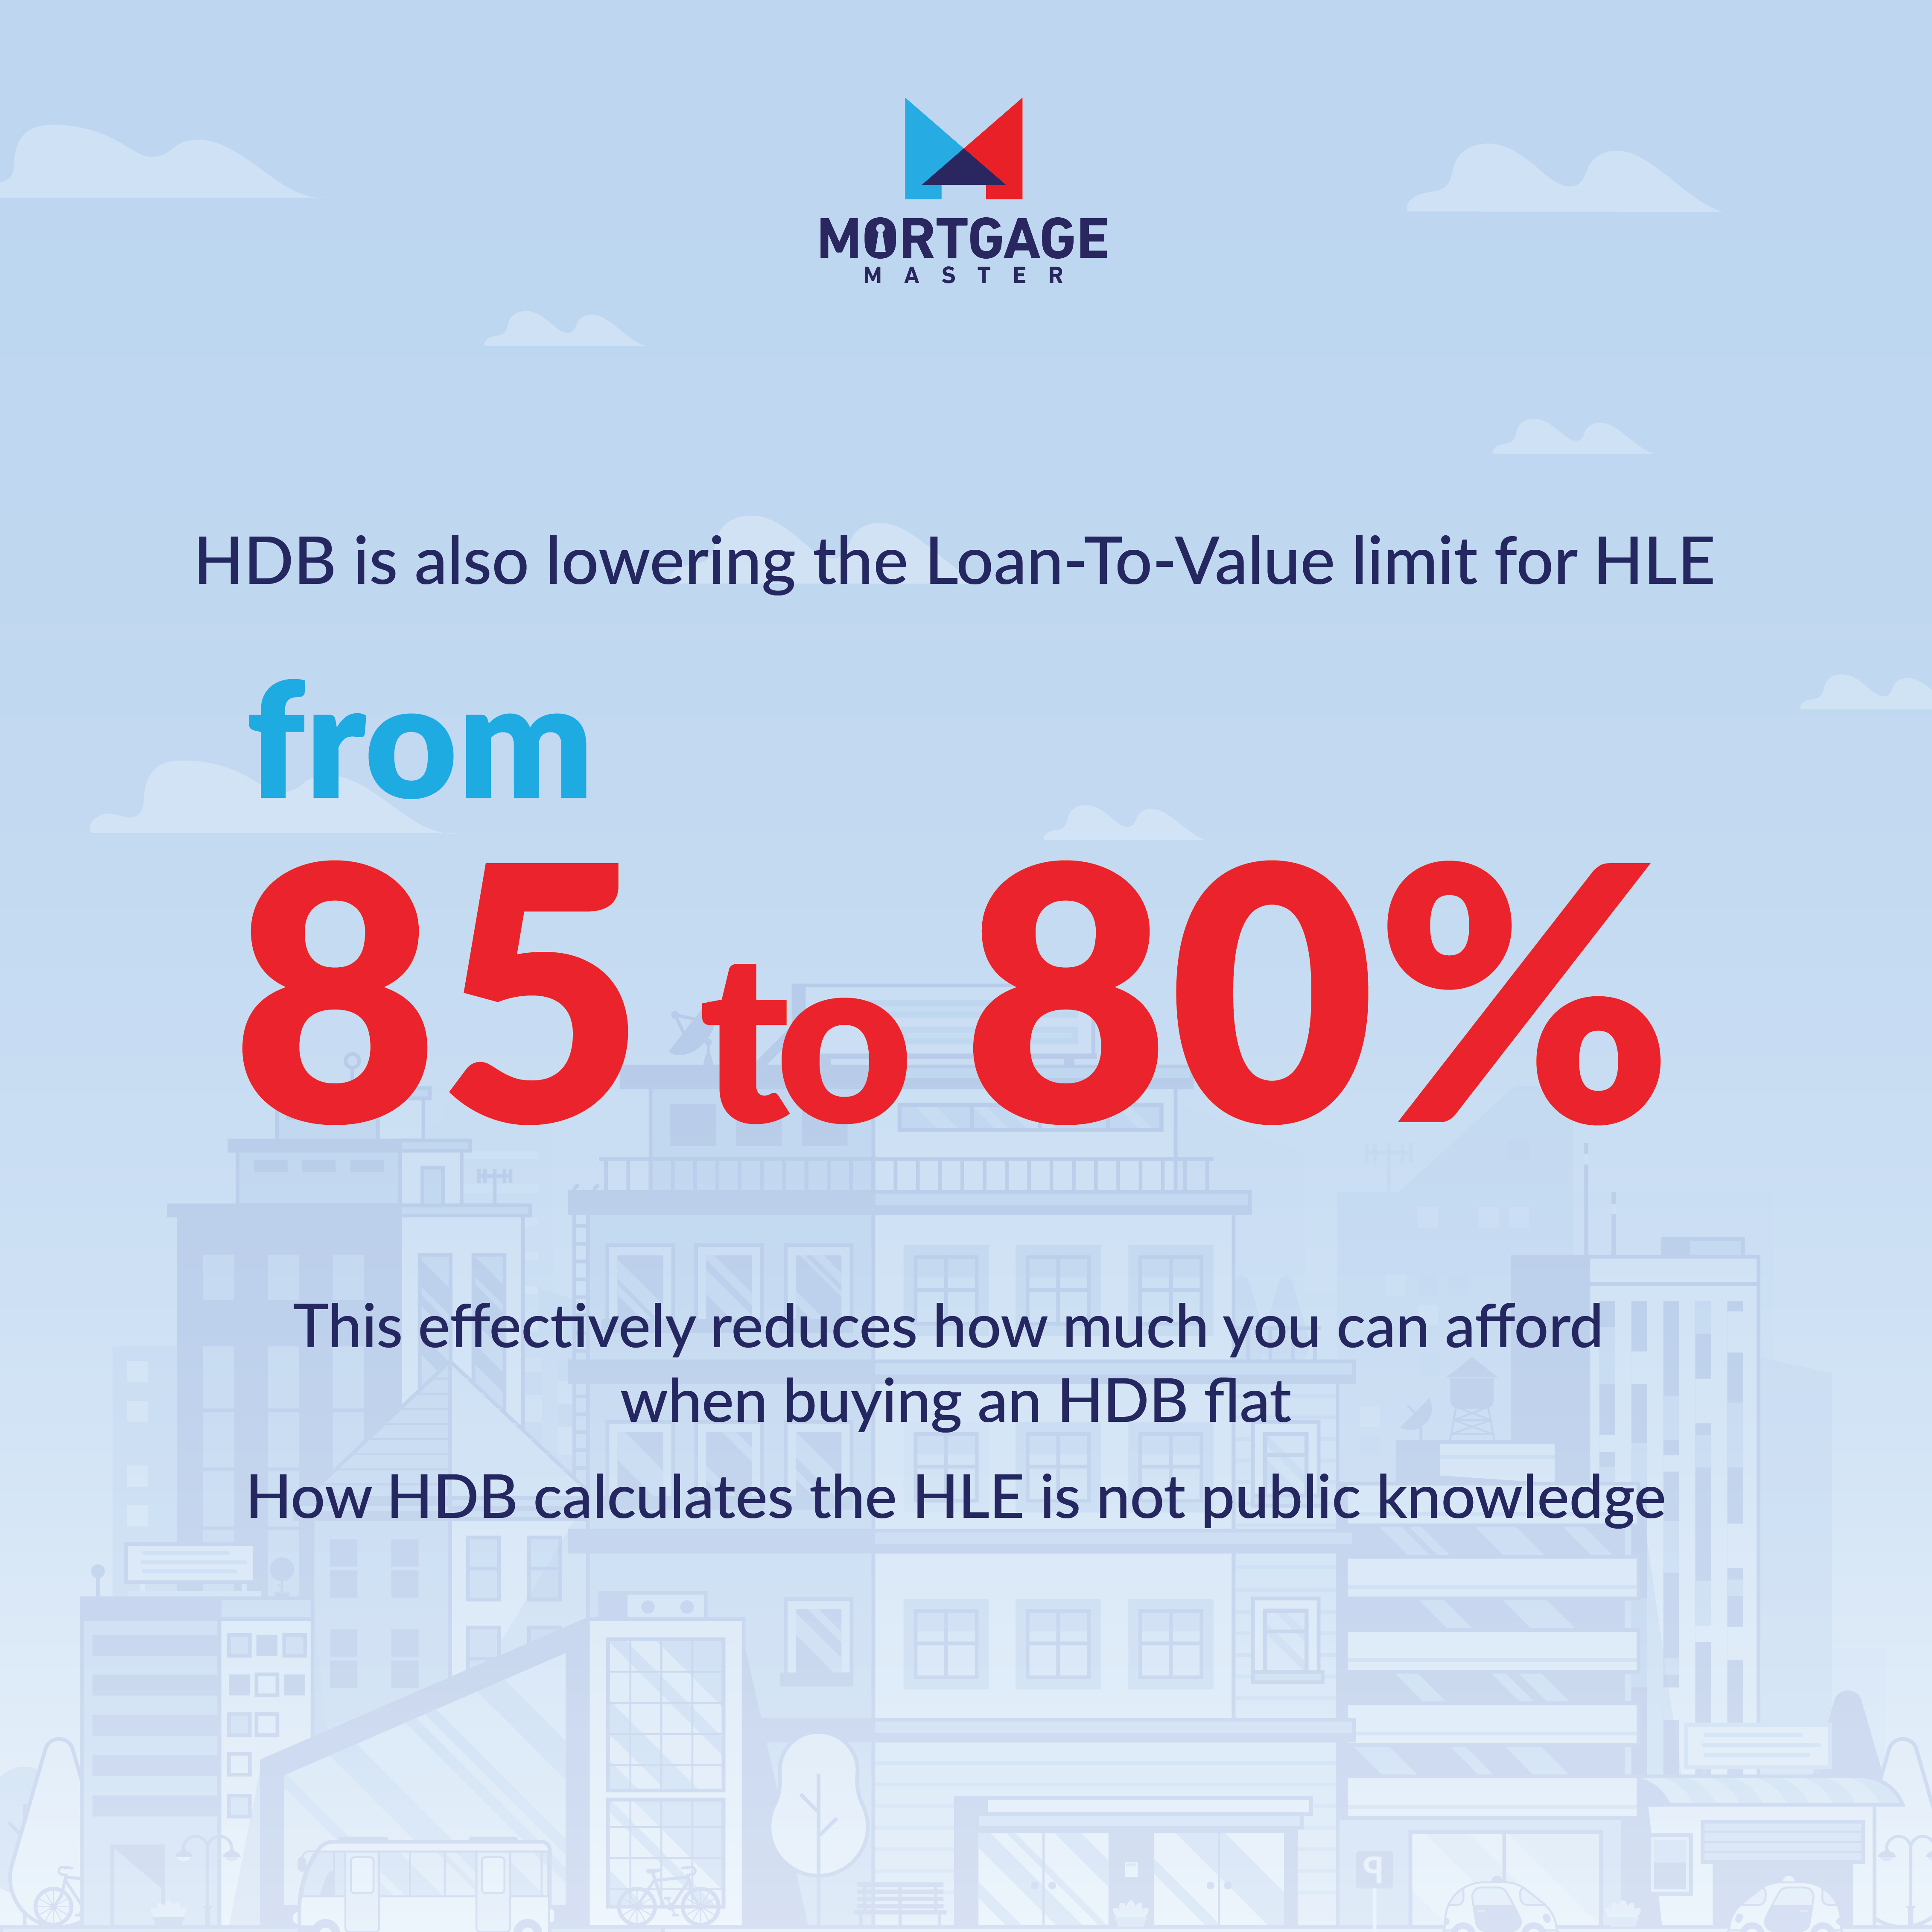 HDB is lowering the HLE LTV from 85% to 80%